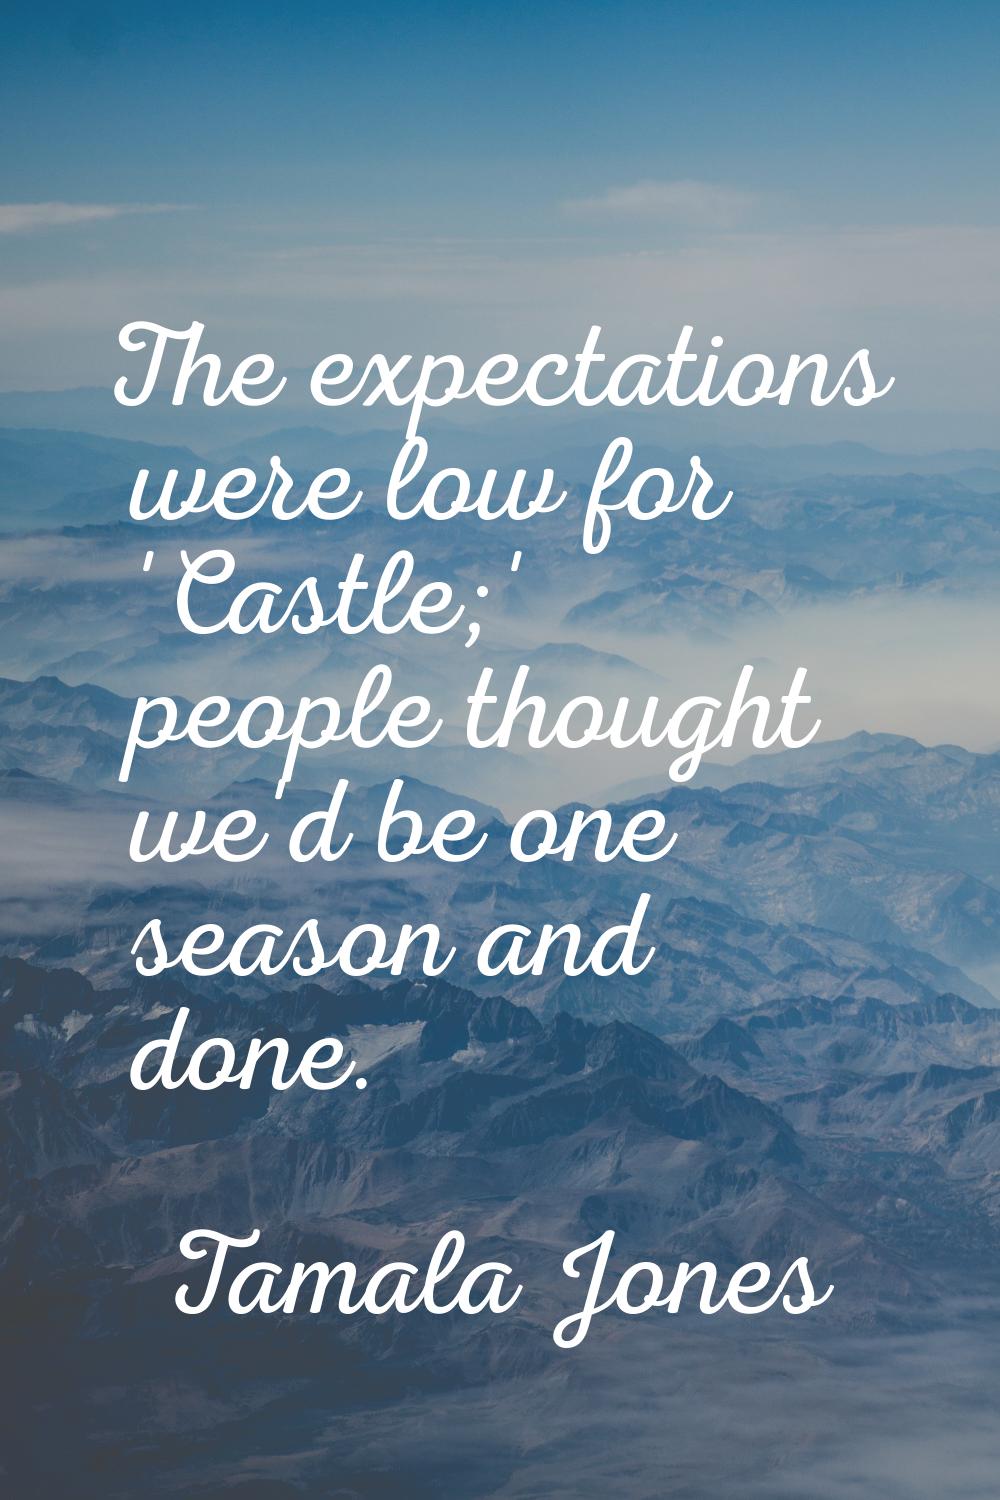 The expectations were low for 'Castle;' people thought we'd be one season and done.